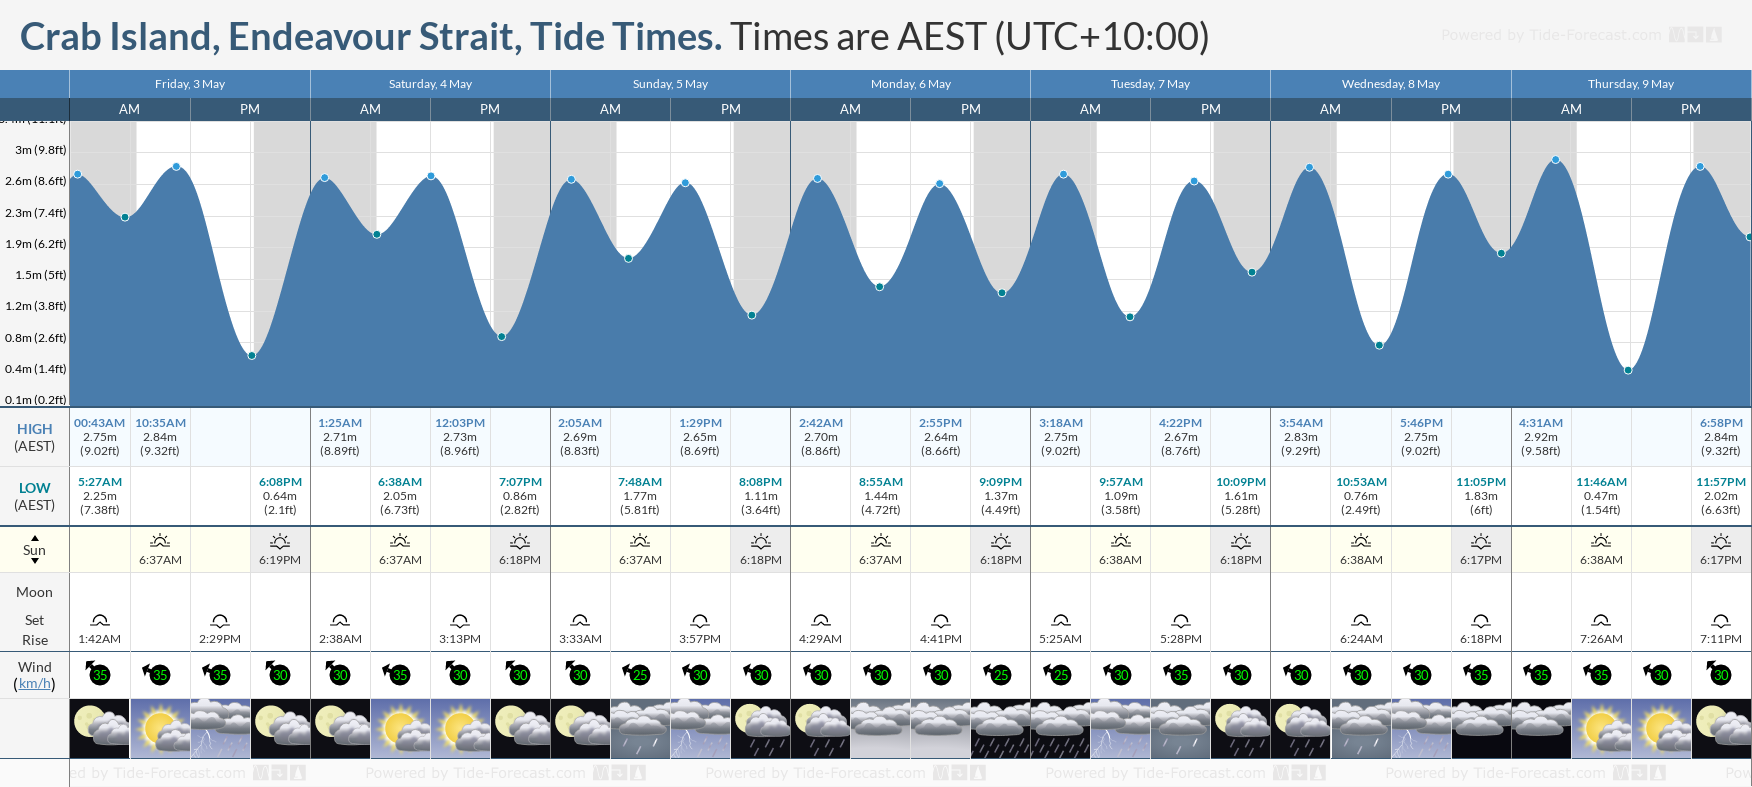 Crab Island, Endeavour Strait Tide Chart including high and low tide tide times for the next 7 days